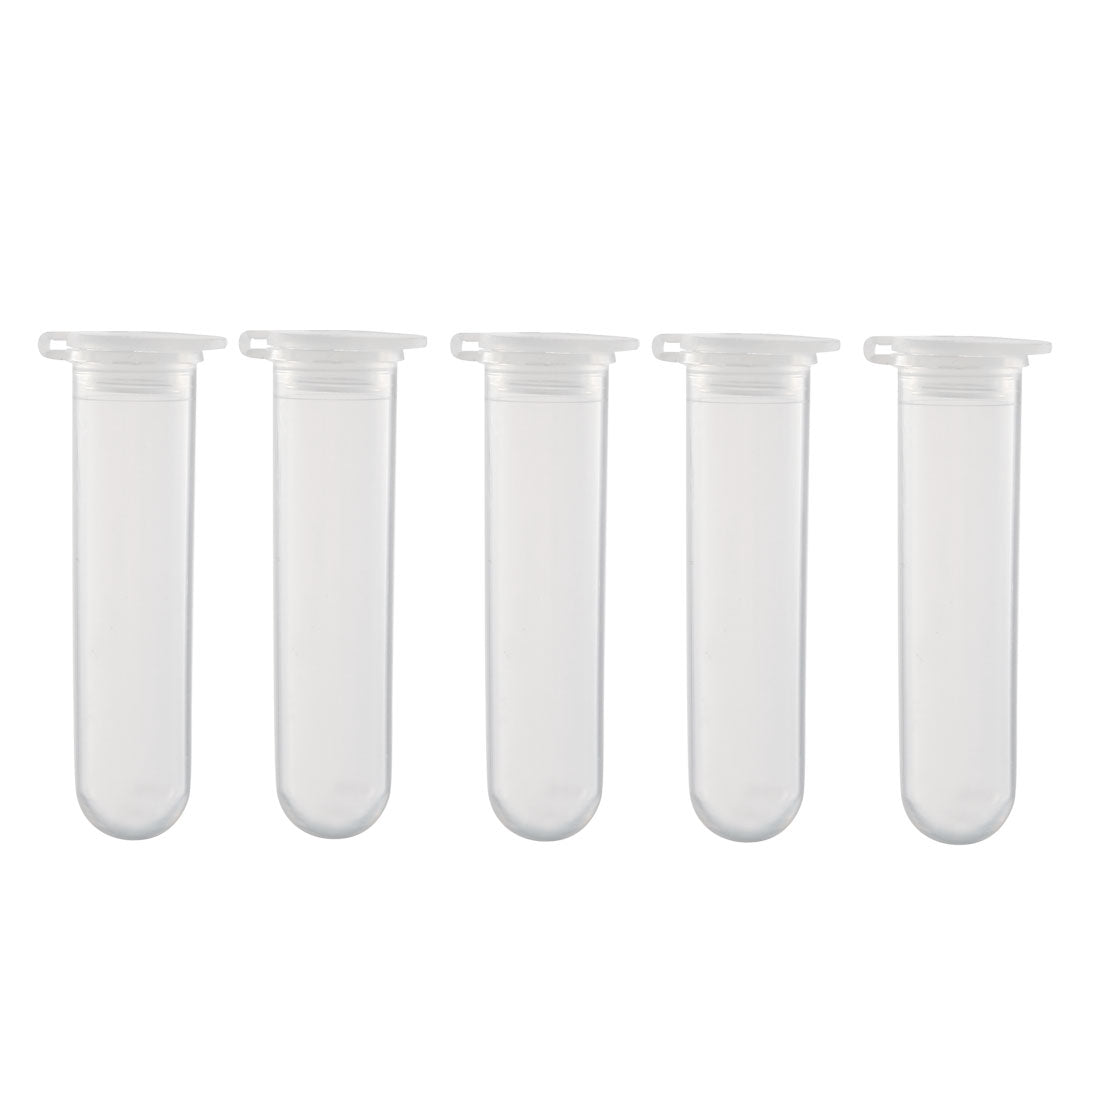 uxcell Uxcell 20 Pcs 7ml Plastic Centrifuge Tubes with Attached Cap, Round Bottom